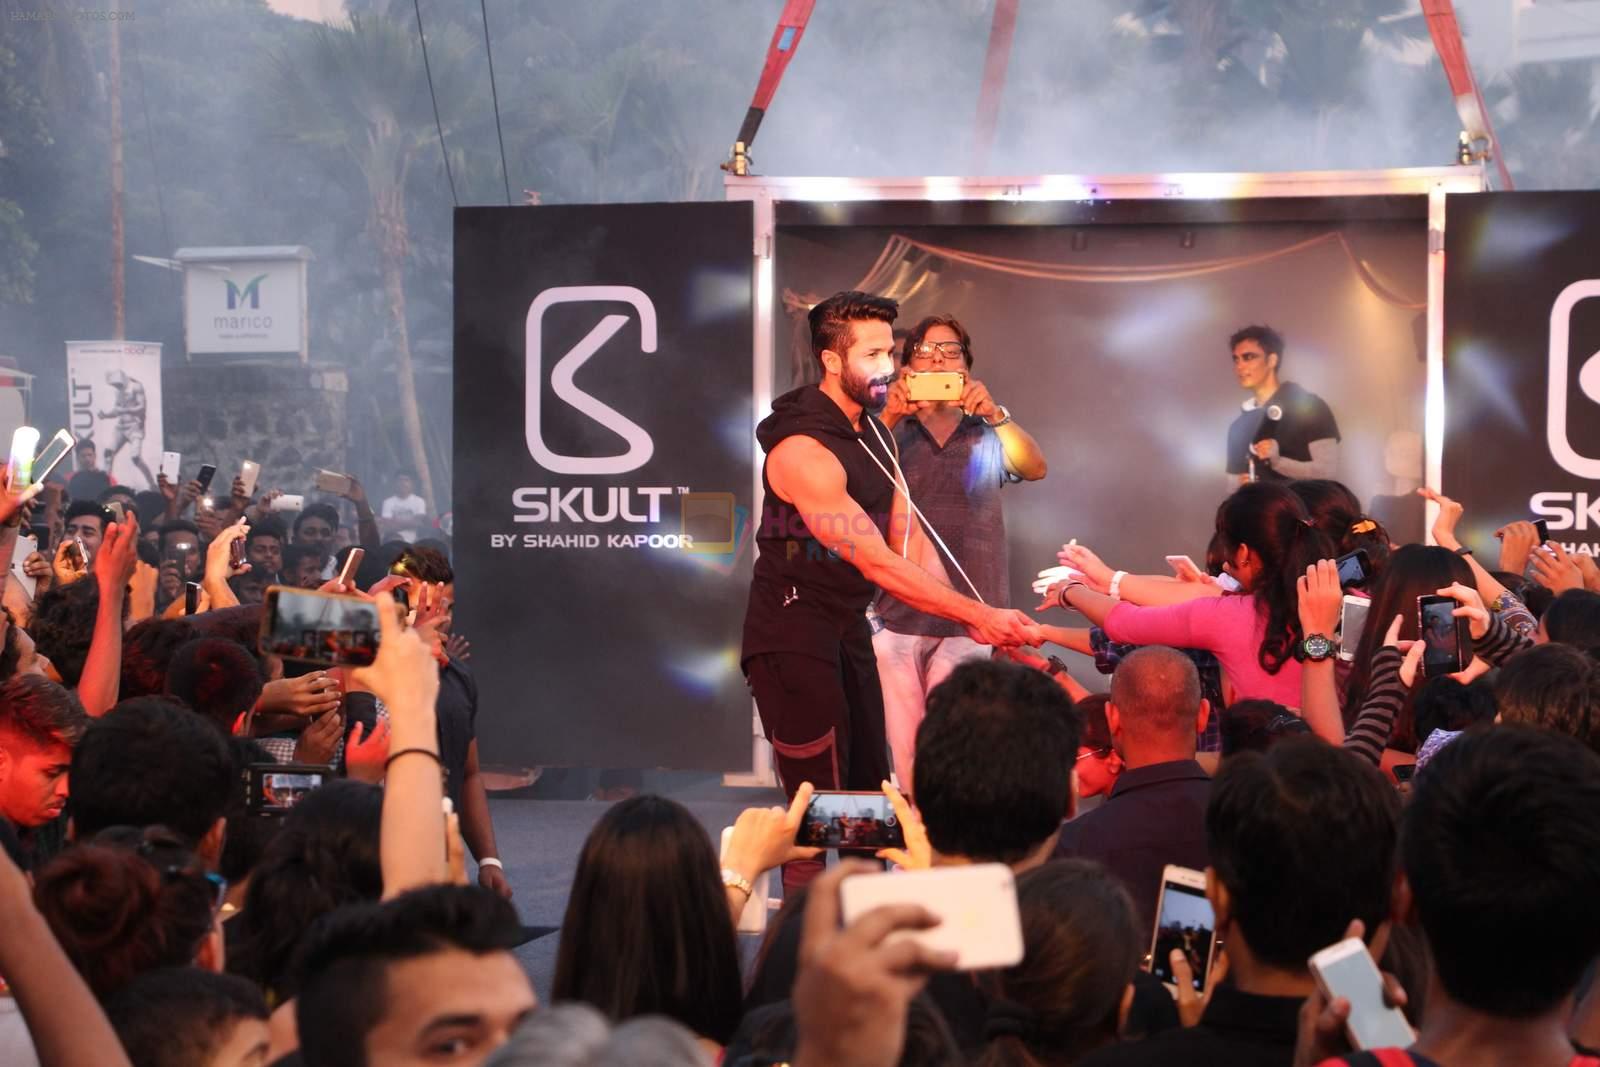 Shahid Kapoor at Skult launch on 18th Oct 2016